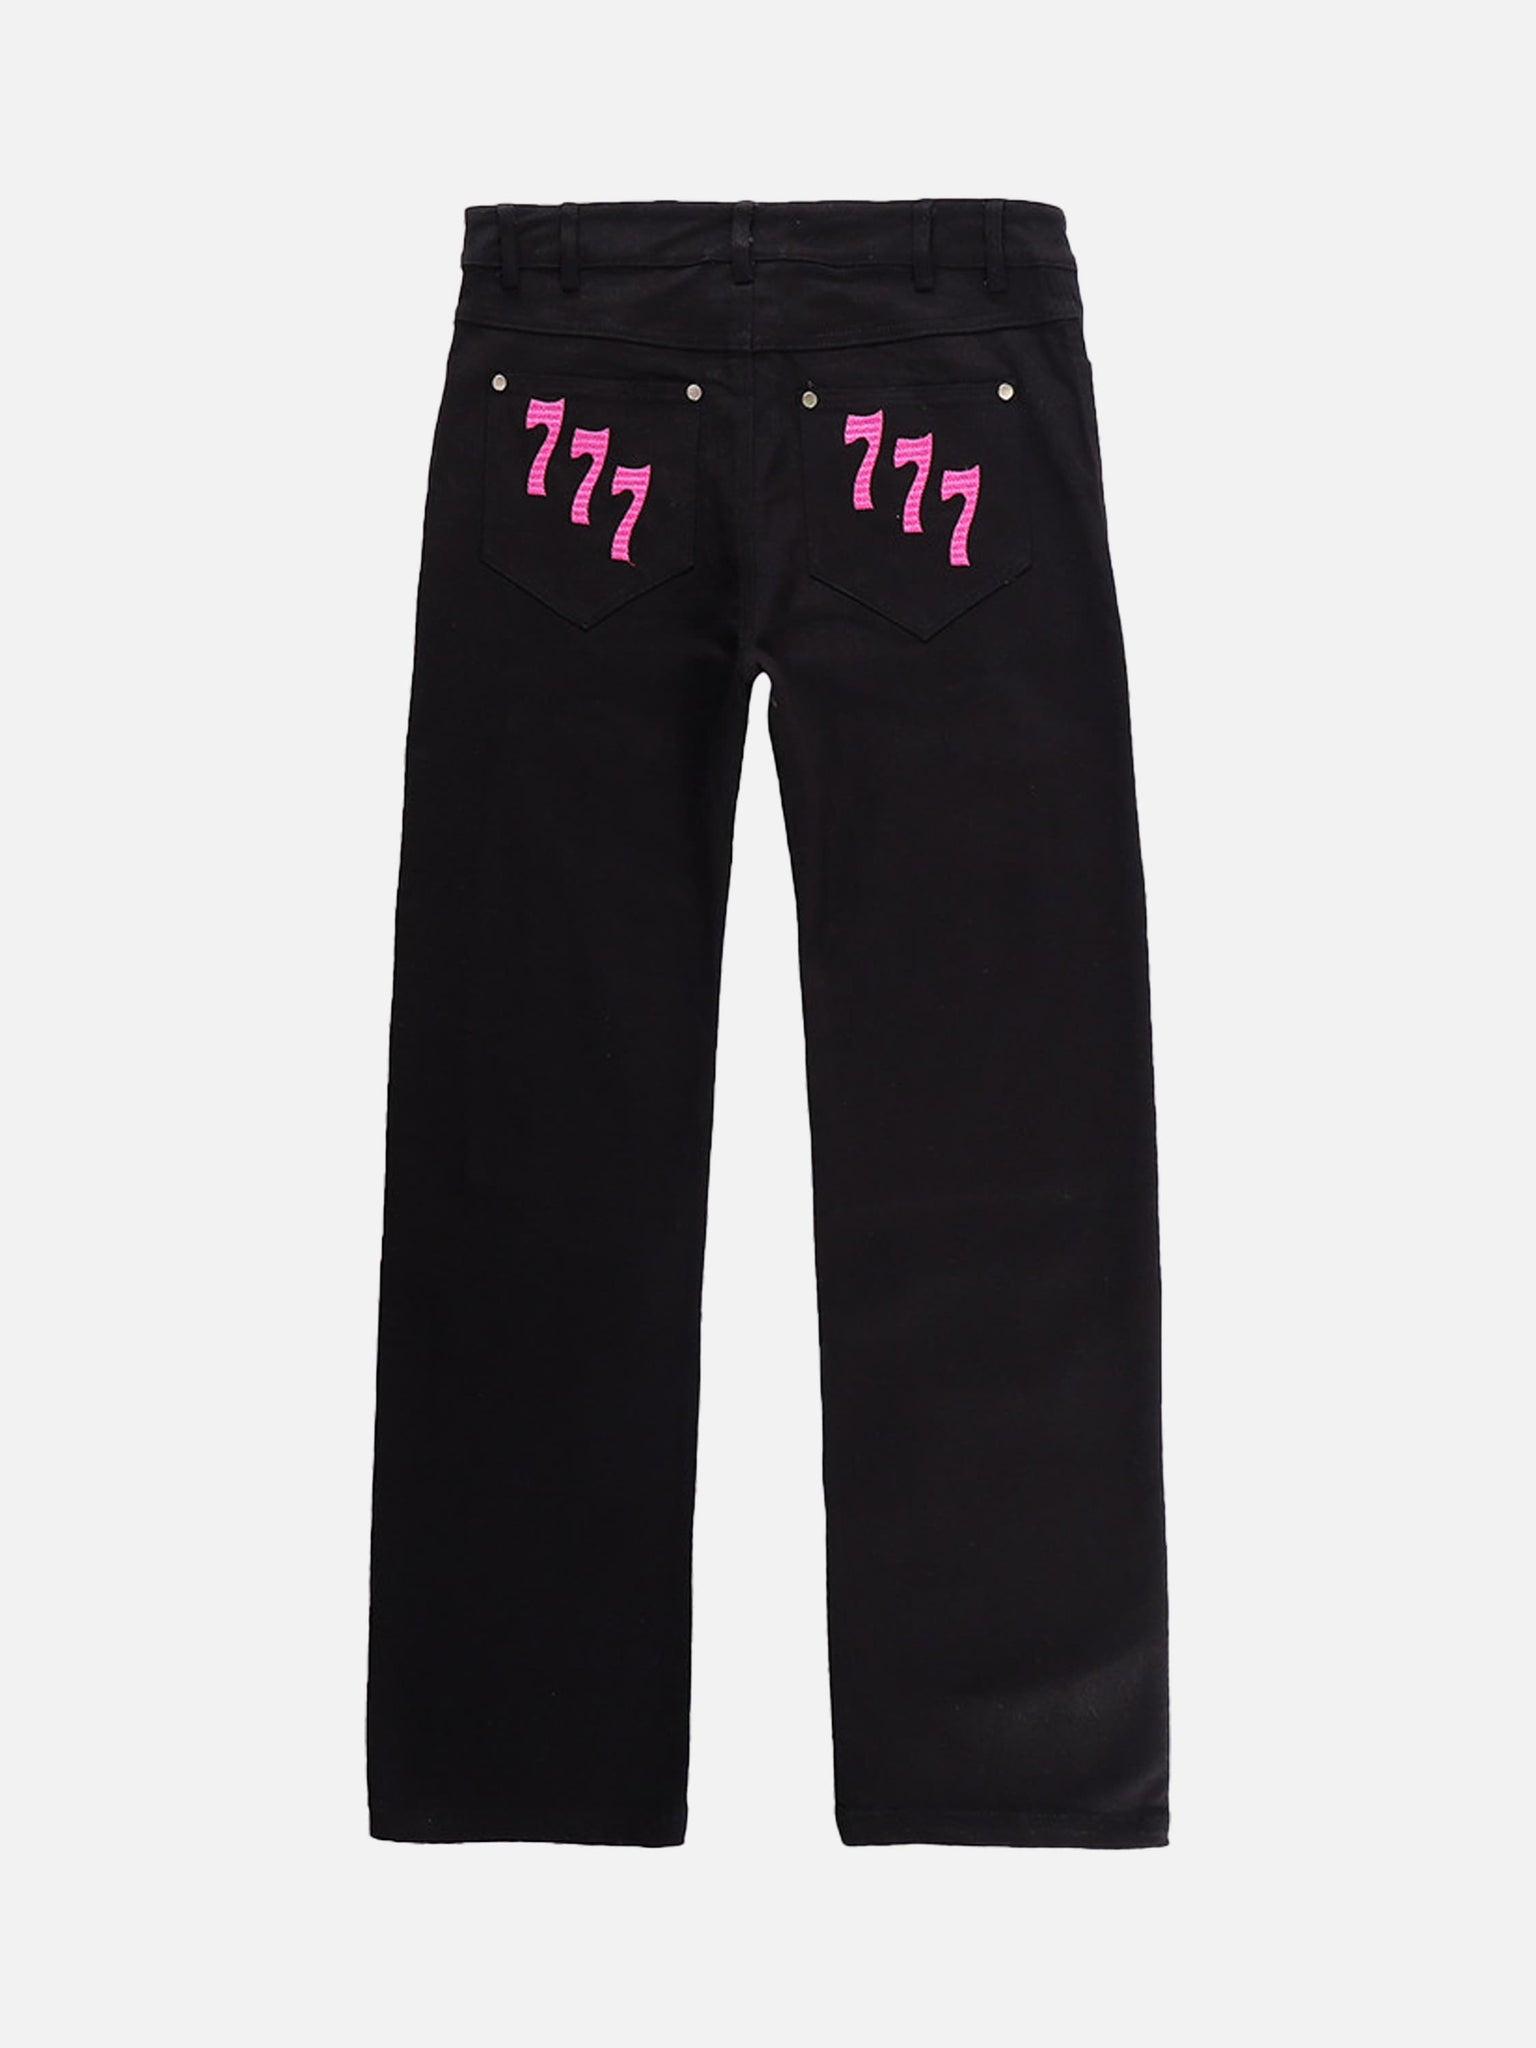 Thesupermade American High Street Digital Embroidered Jeans